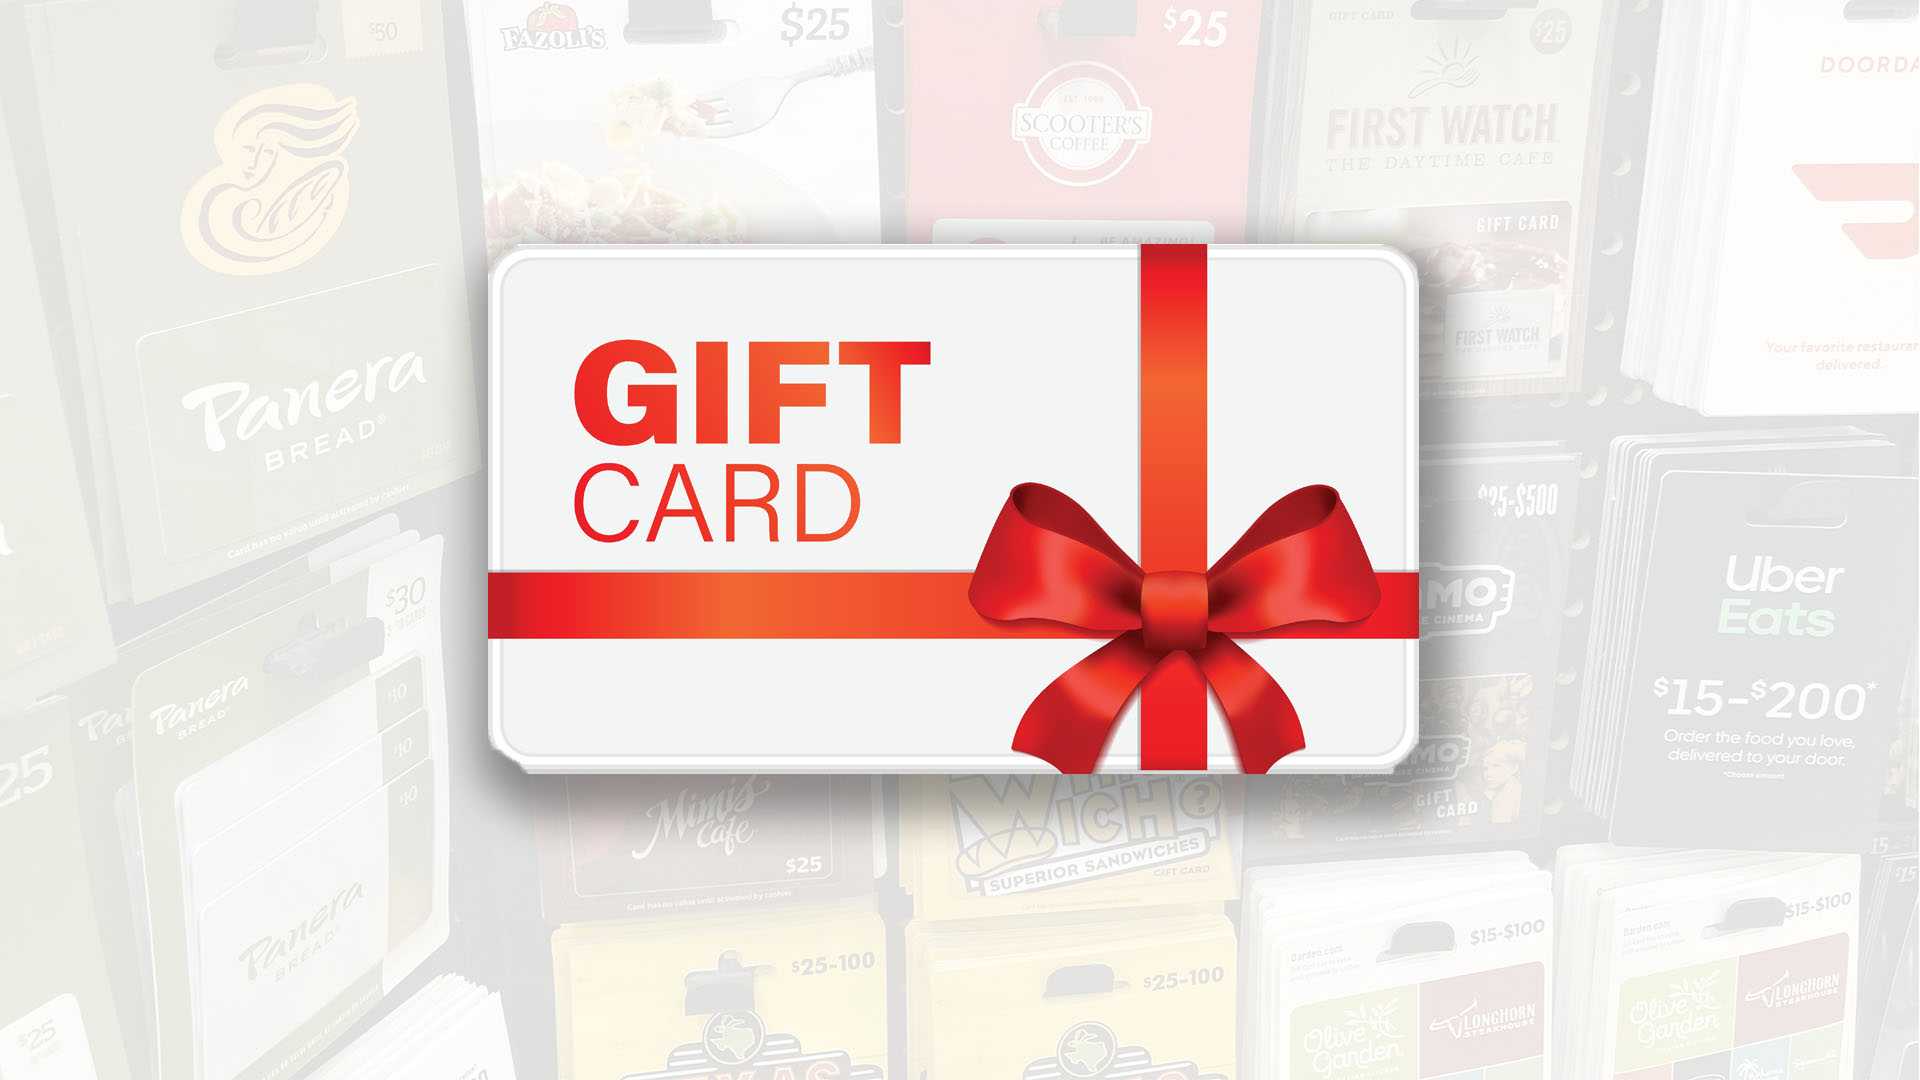 Swych Gift Card - Rs.500 : Amazon.in: Gift Cards